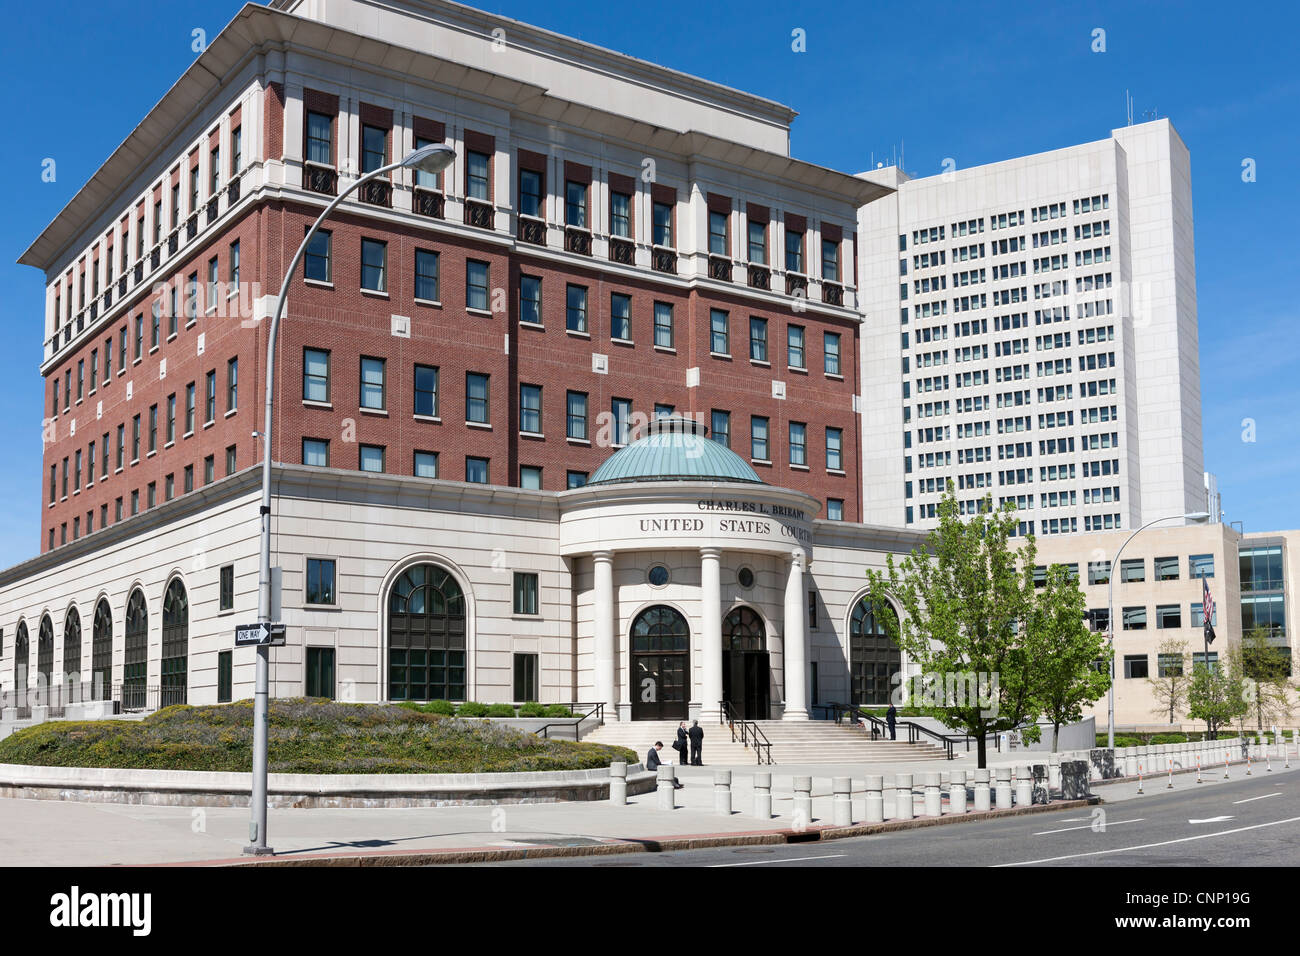 The Charles L. Brieant US Federal Building and Courthouse (Southern District of New York), located in White Plains, New York. Stock Photo